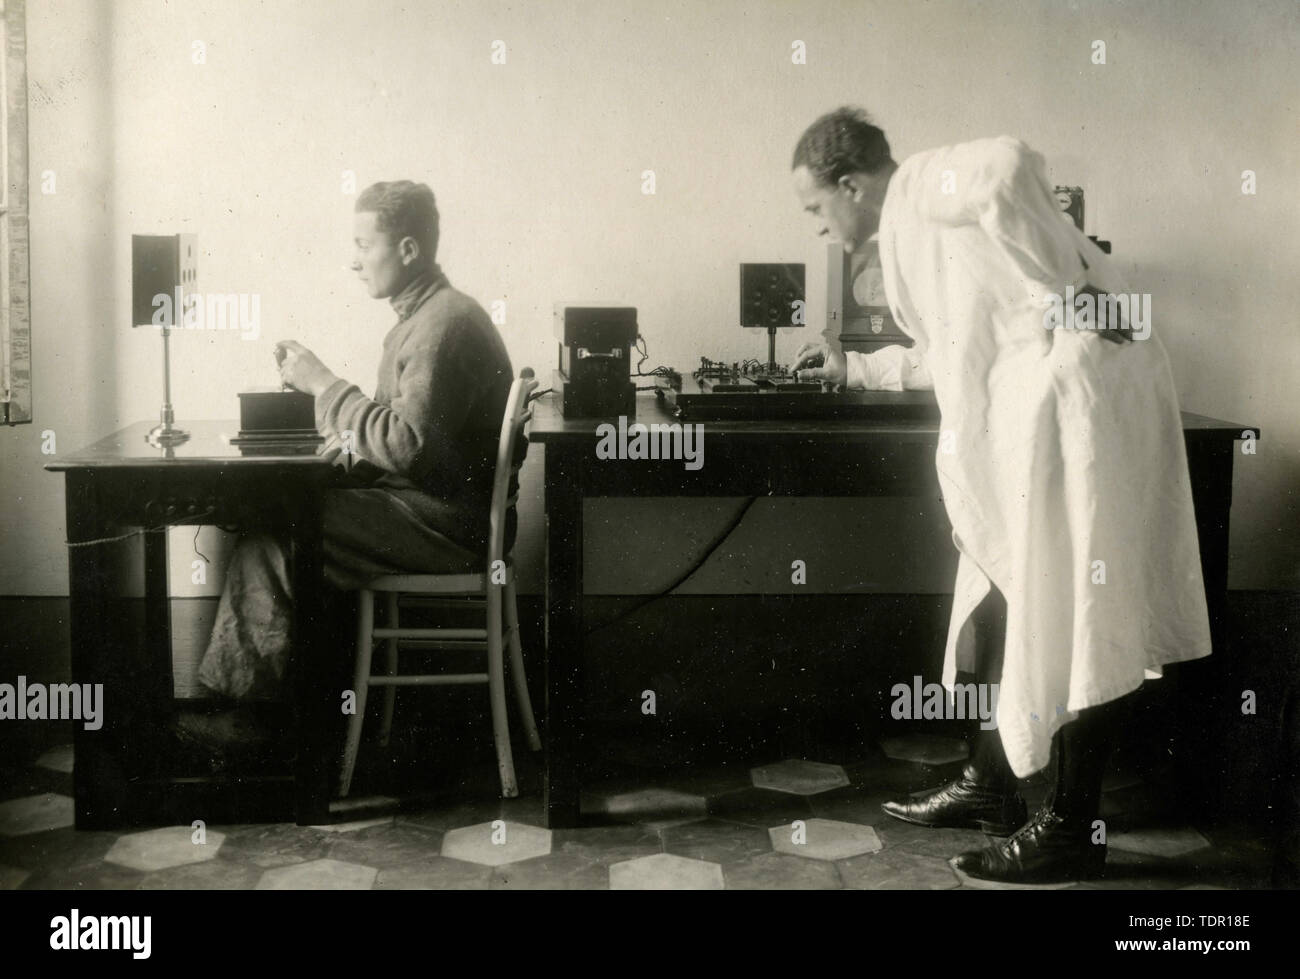 Response time research at the Air Force Medical Laboratory Montecelio, Rome, Italy 1920s Stock Photo